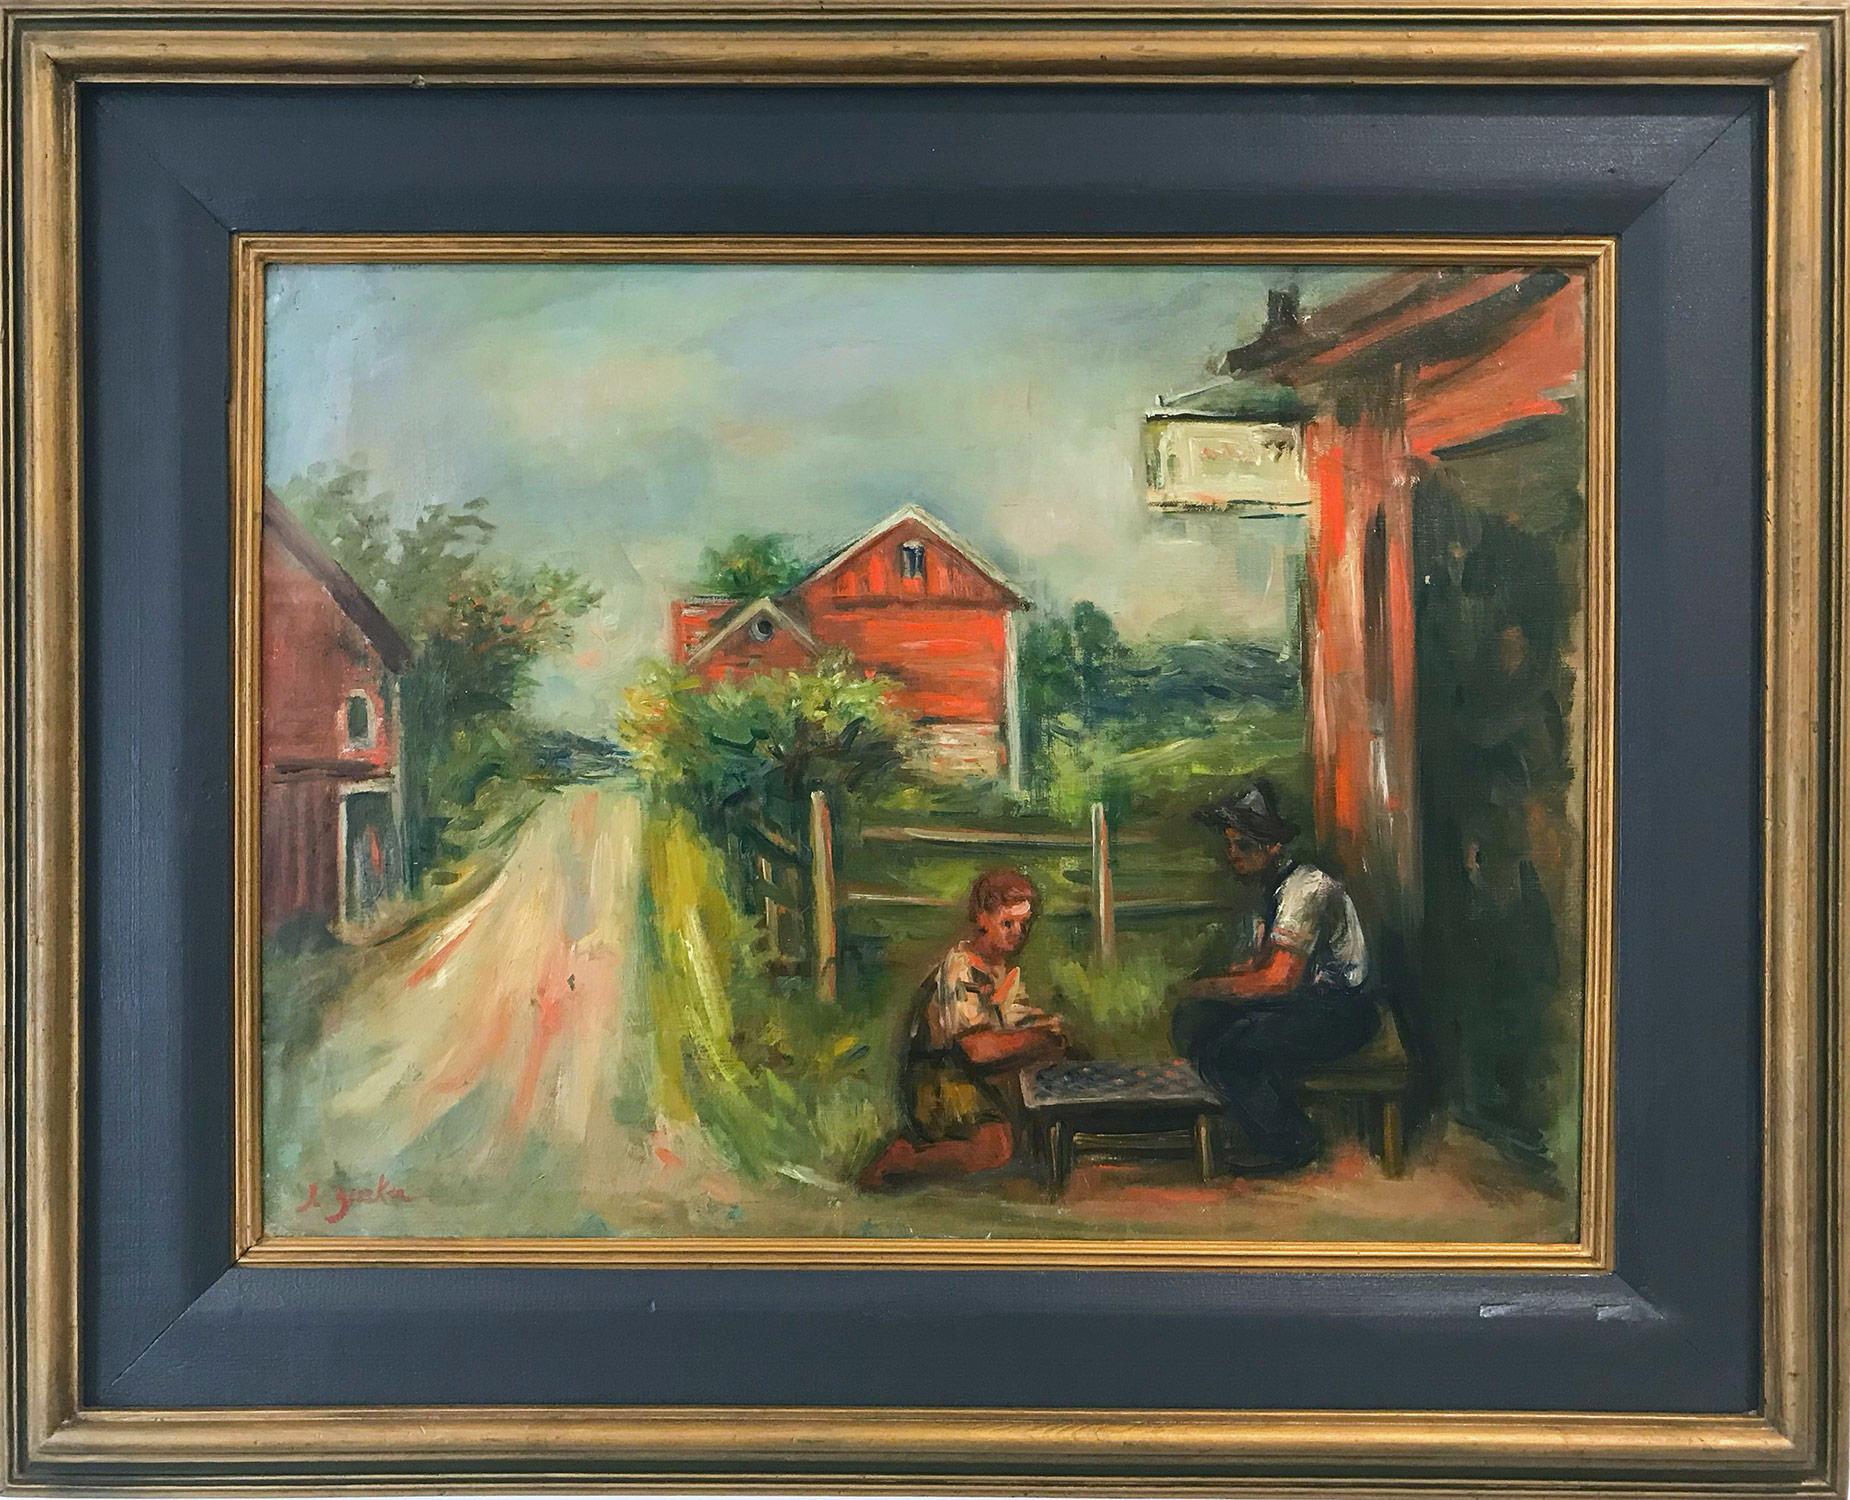 Jacques Zucker Landscape Painting - "Playing Checkers" Post-Impressionist of a Mexican Village Oil Painting on Board